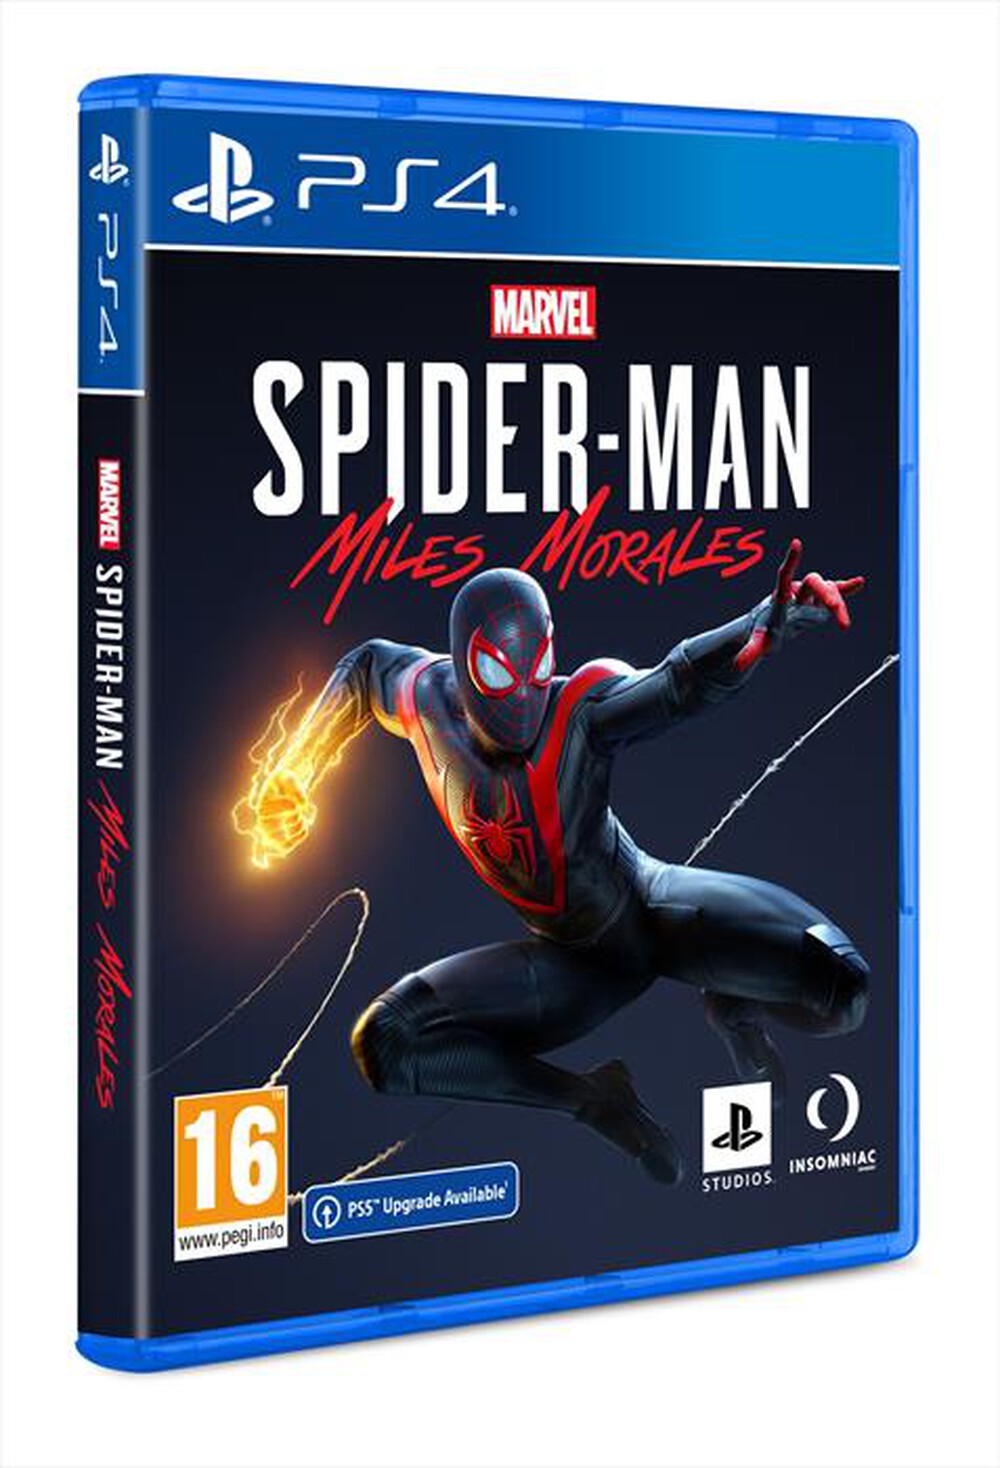 "SONY COMPUTER - MARVEL'S SPIDER-MAN MILES MORALES (PS4)"